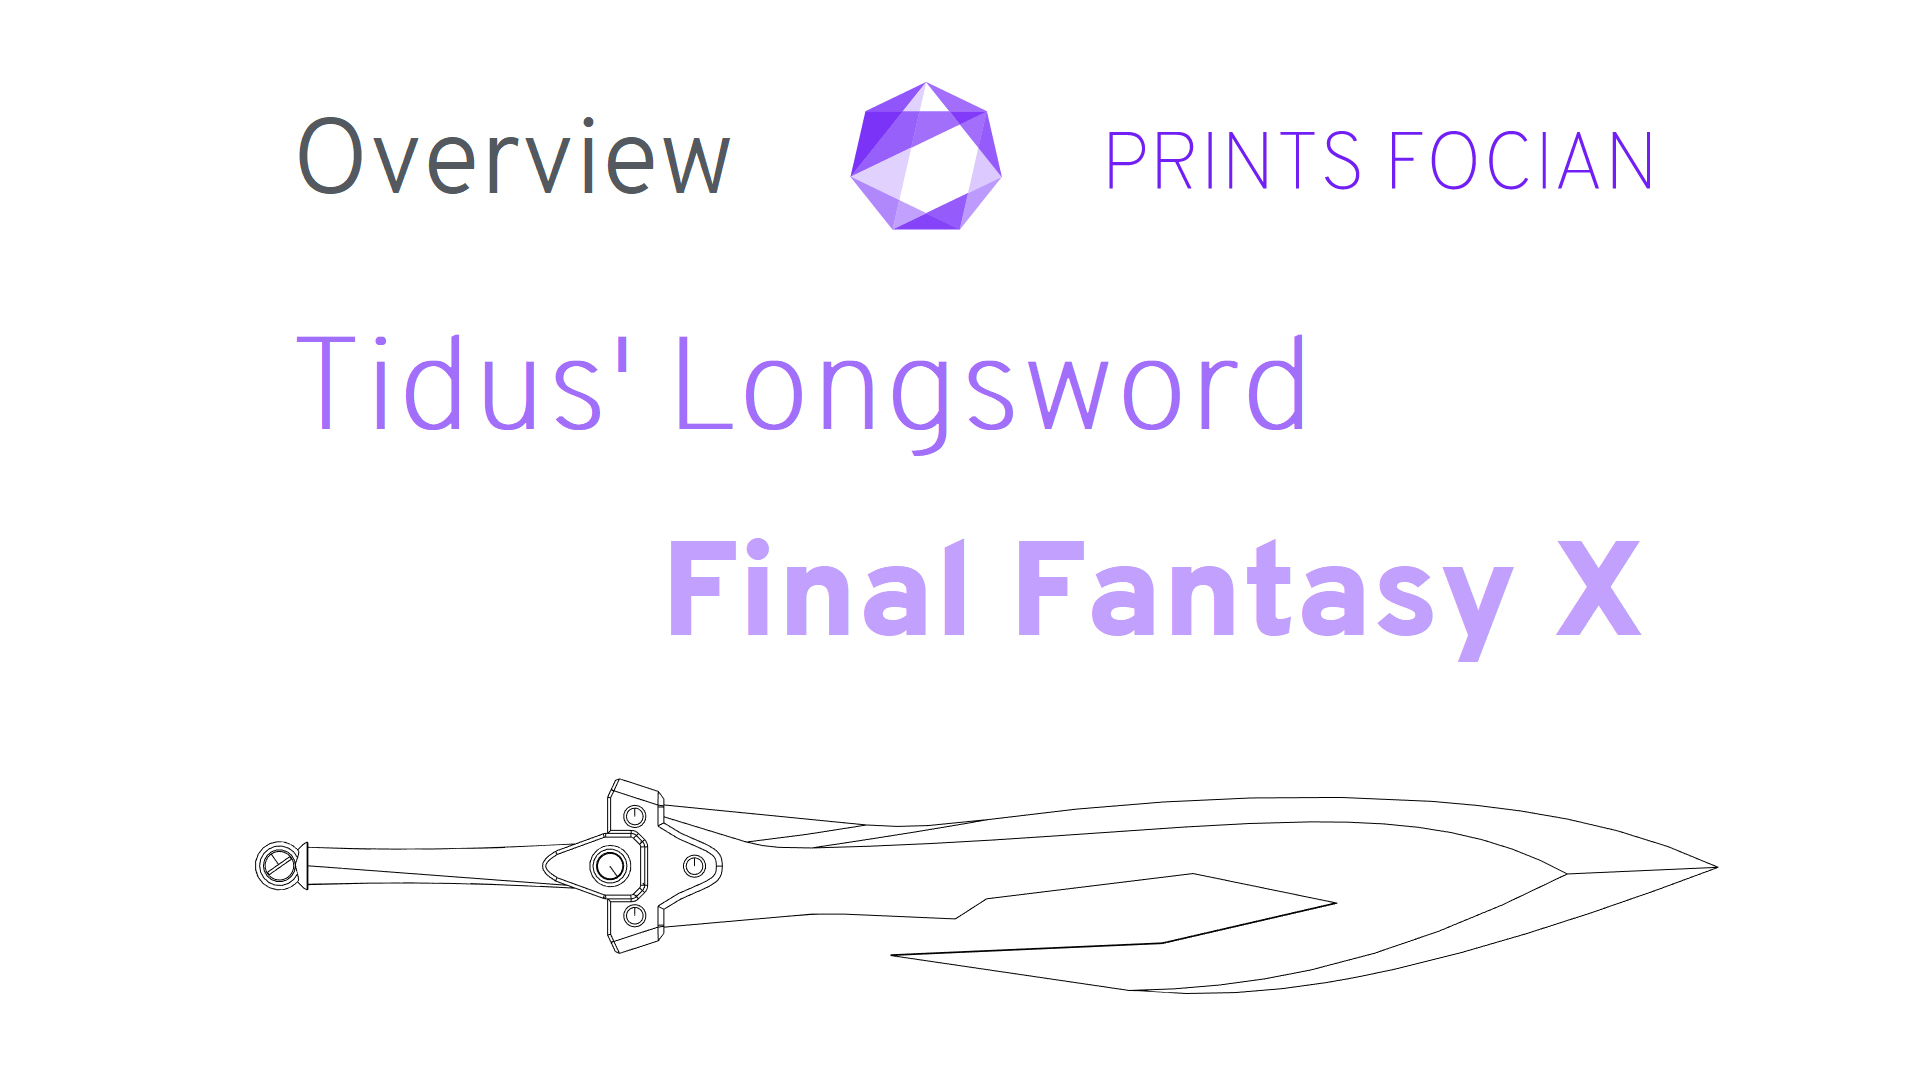 Wireframe image of the Tidus' Longsword on a white background. Prints Focian Icon top and central. Text: Purple Prints Focian, Tidus' Longsword, FInal Fantasy X and dark grey Overview